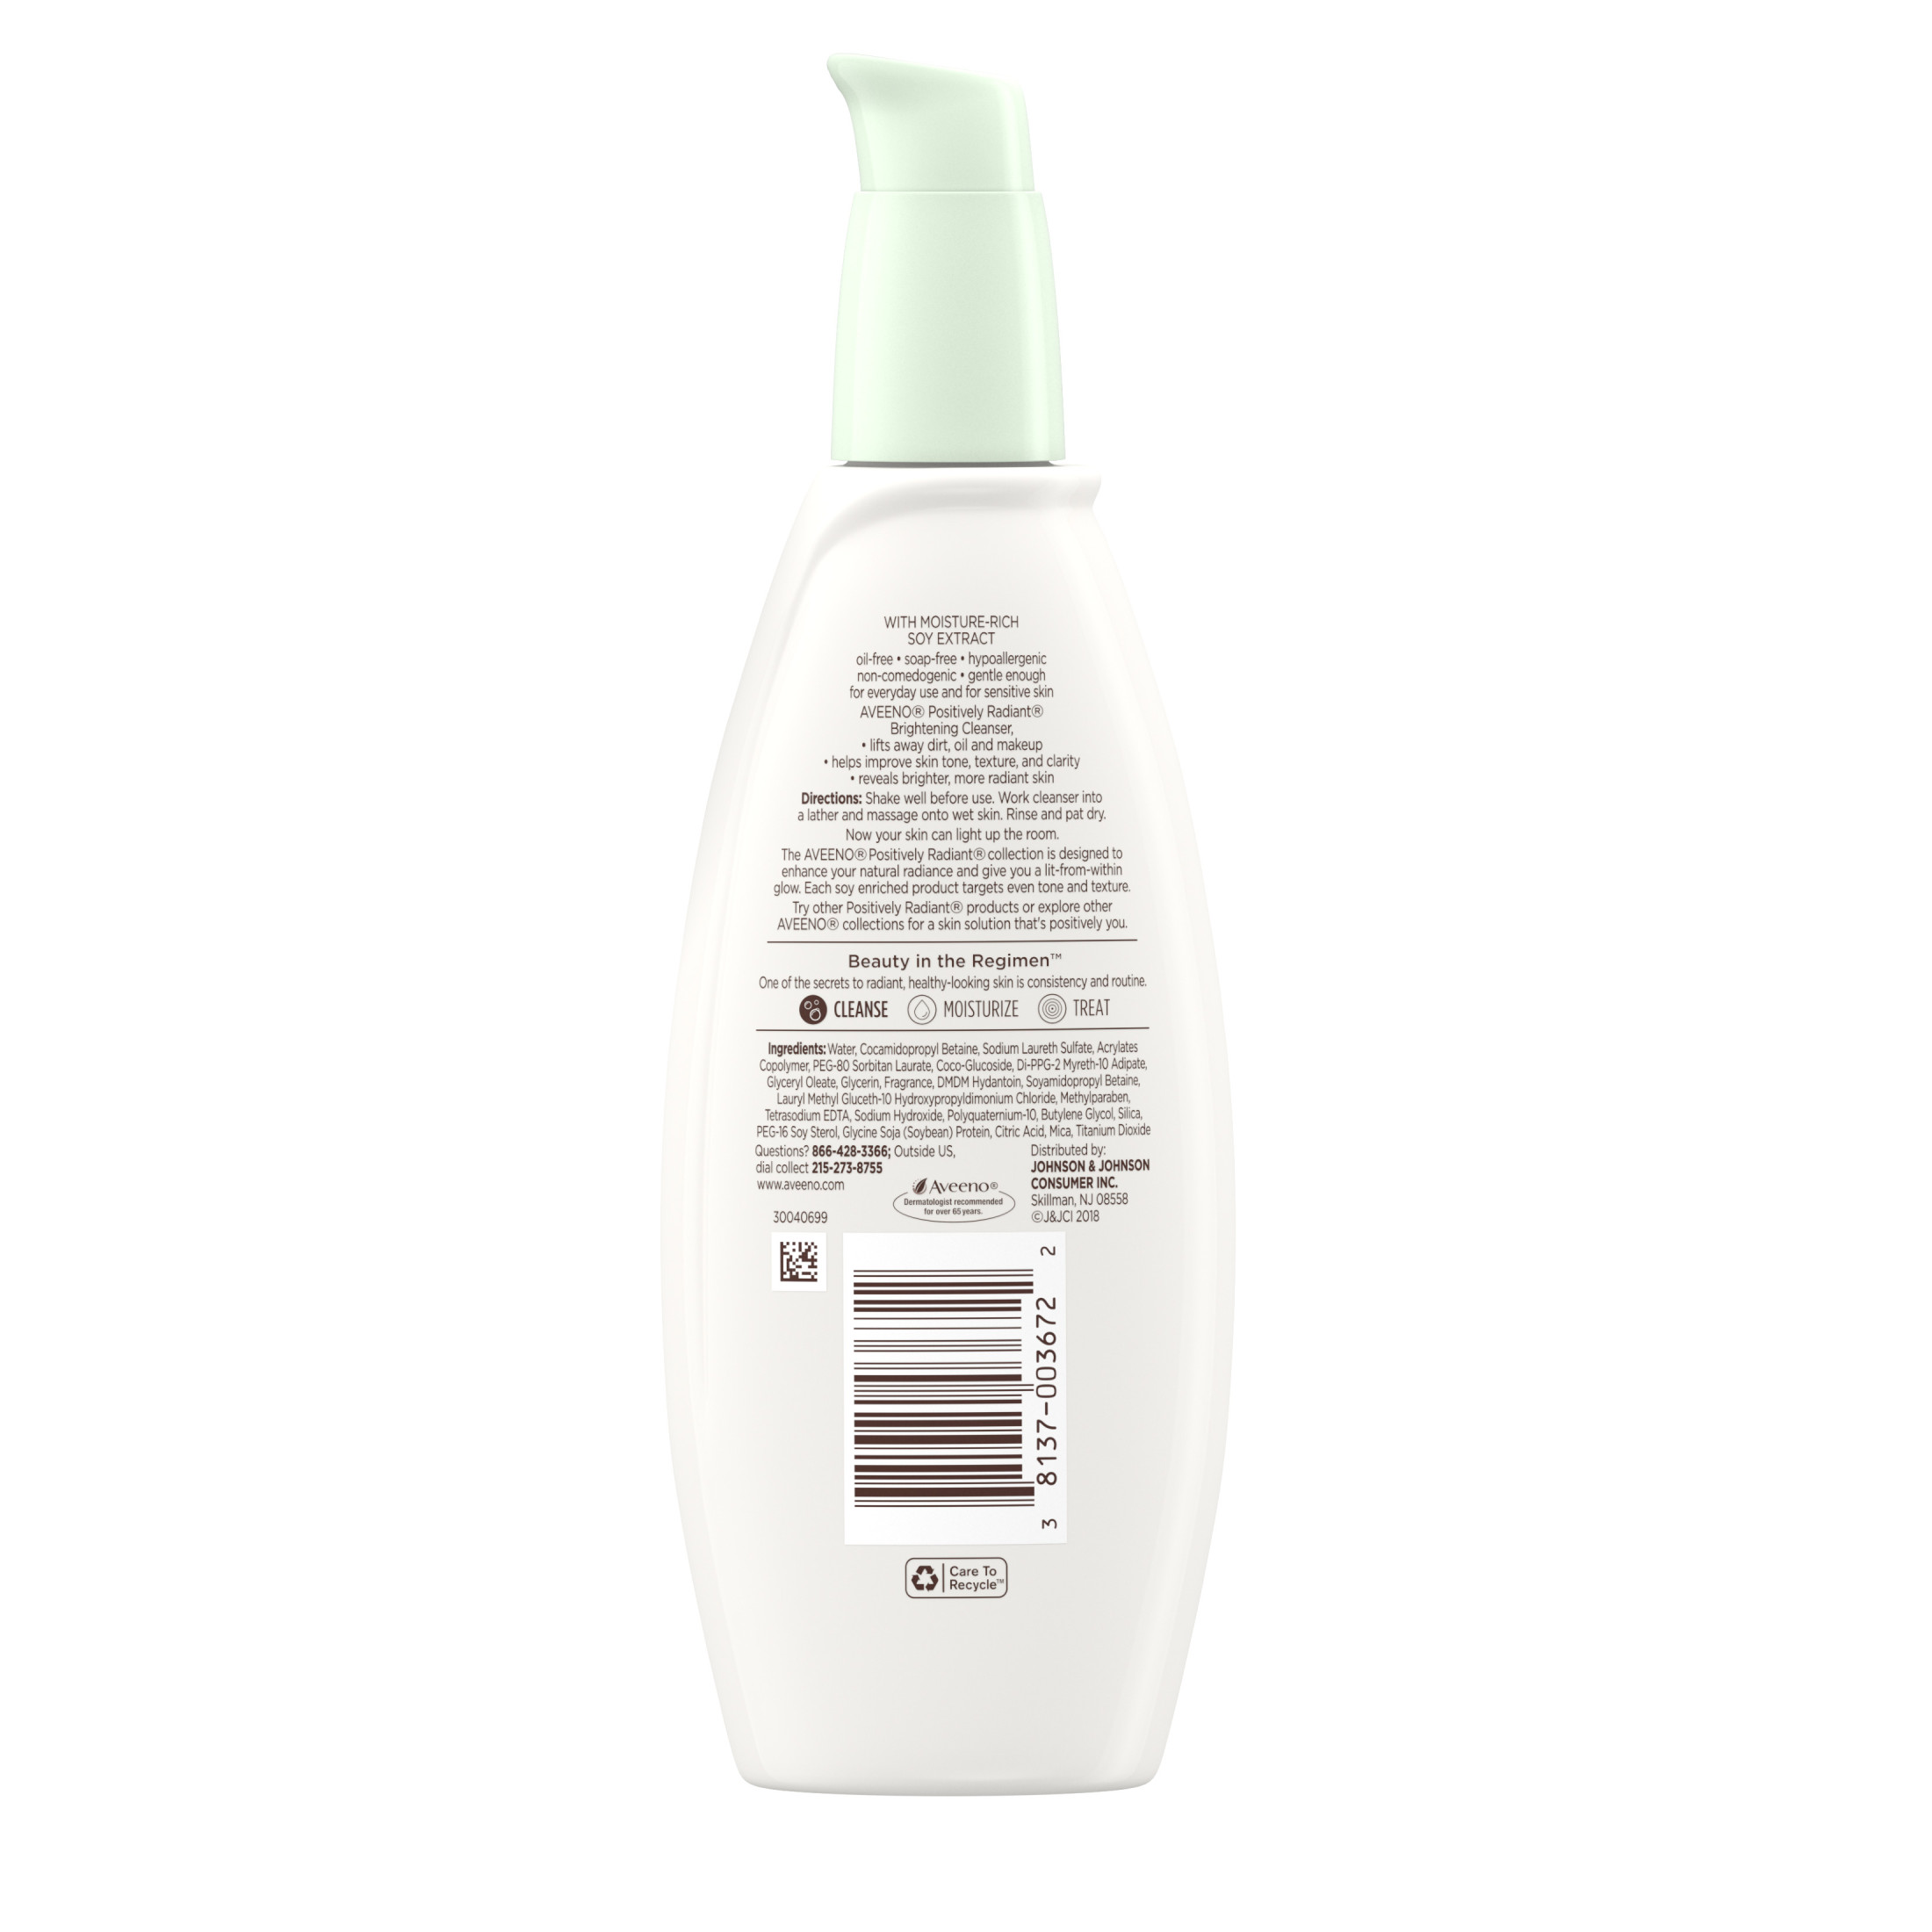 Aveeno Positively Radiant Brightening Facial Cleanser, 6.7 fl. oz - image 2 of 6